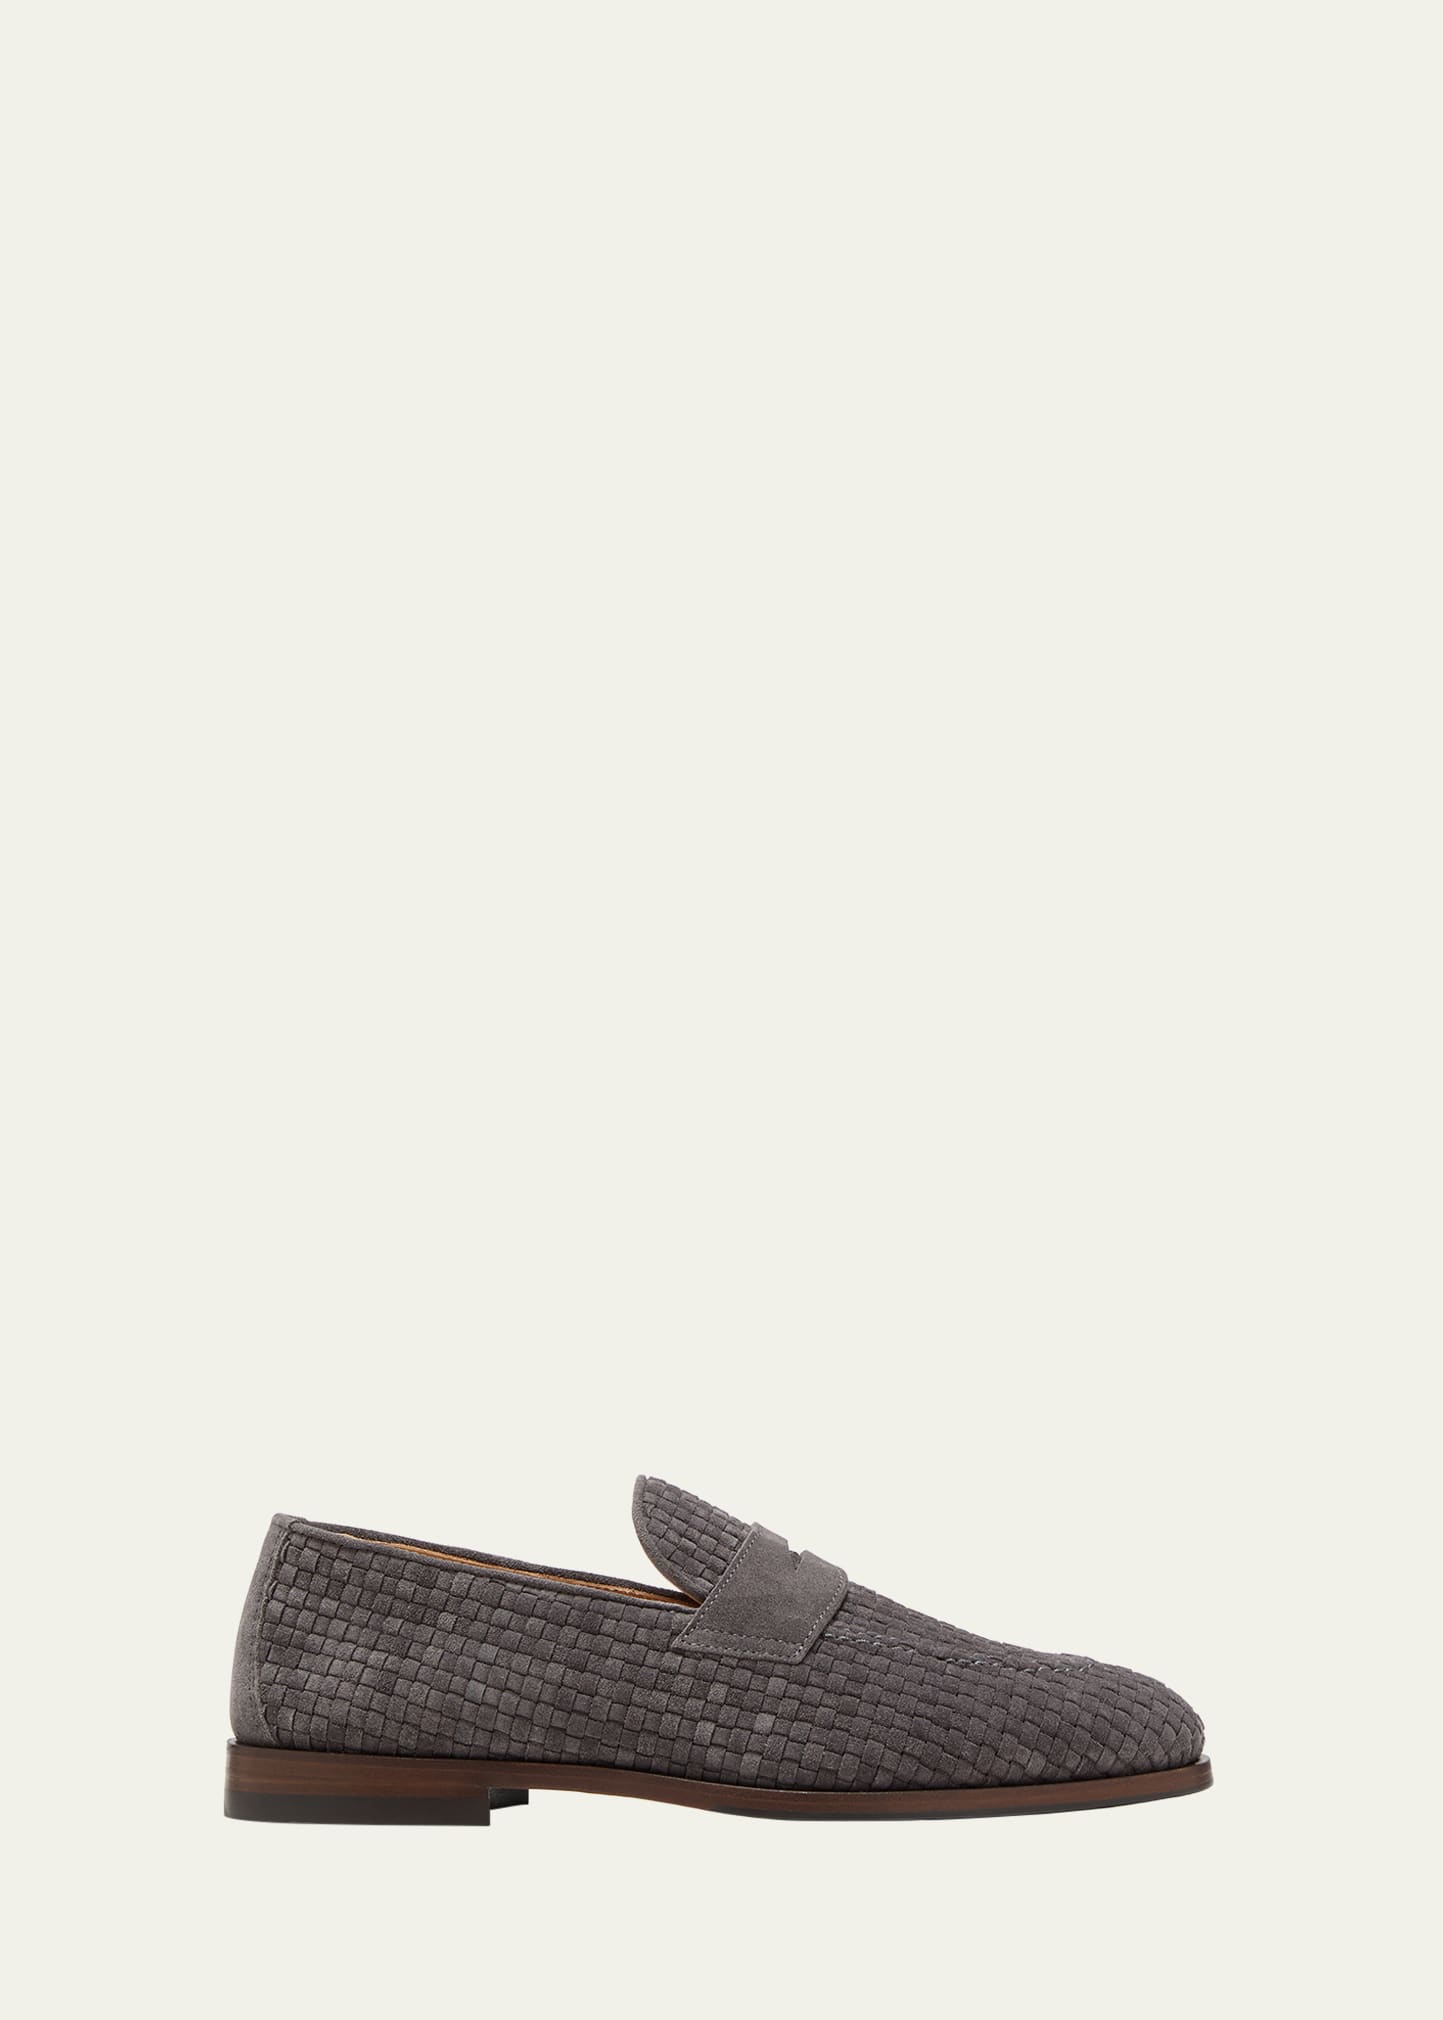 Brunello Cucinelli Woven Suede Penny Loafers In Gray